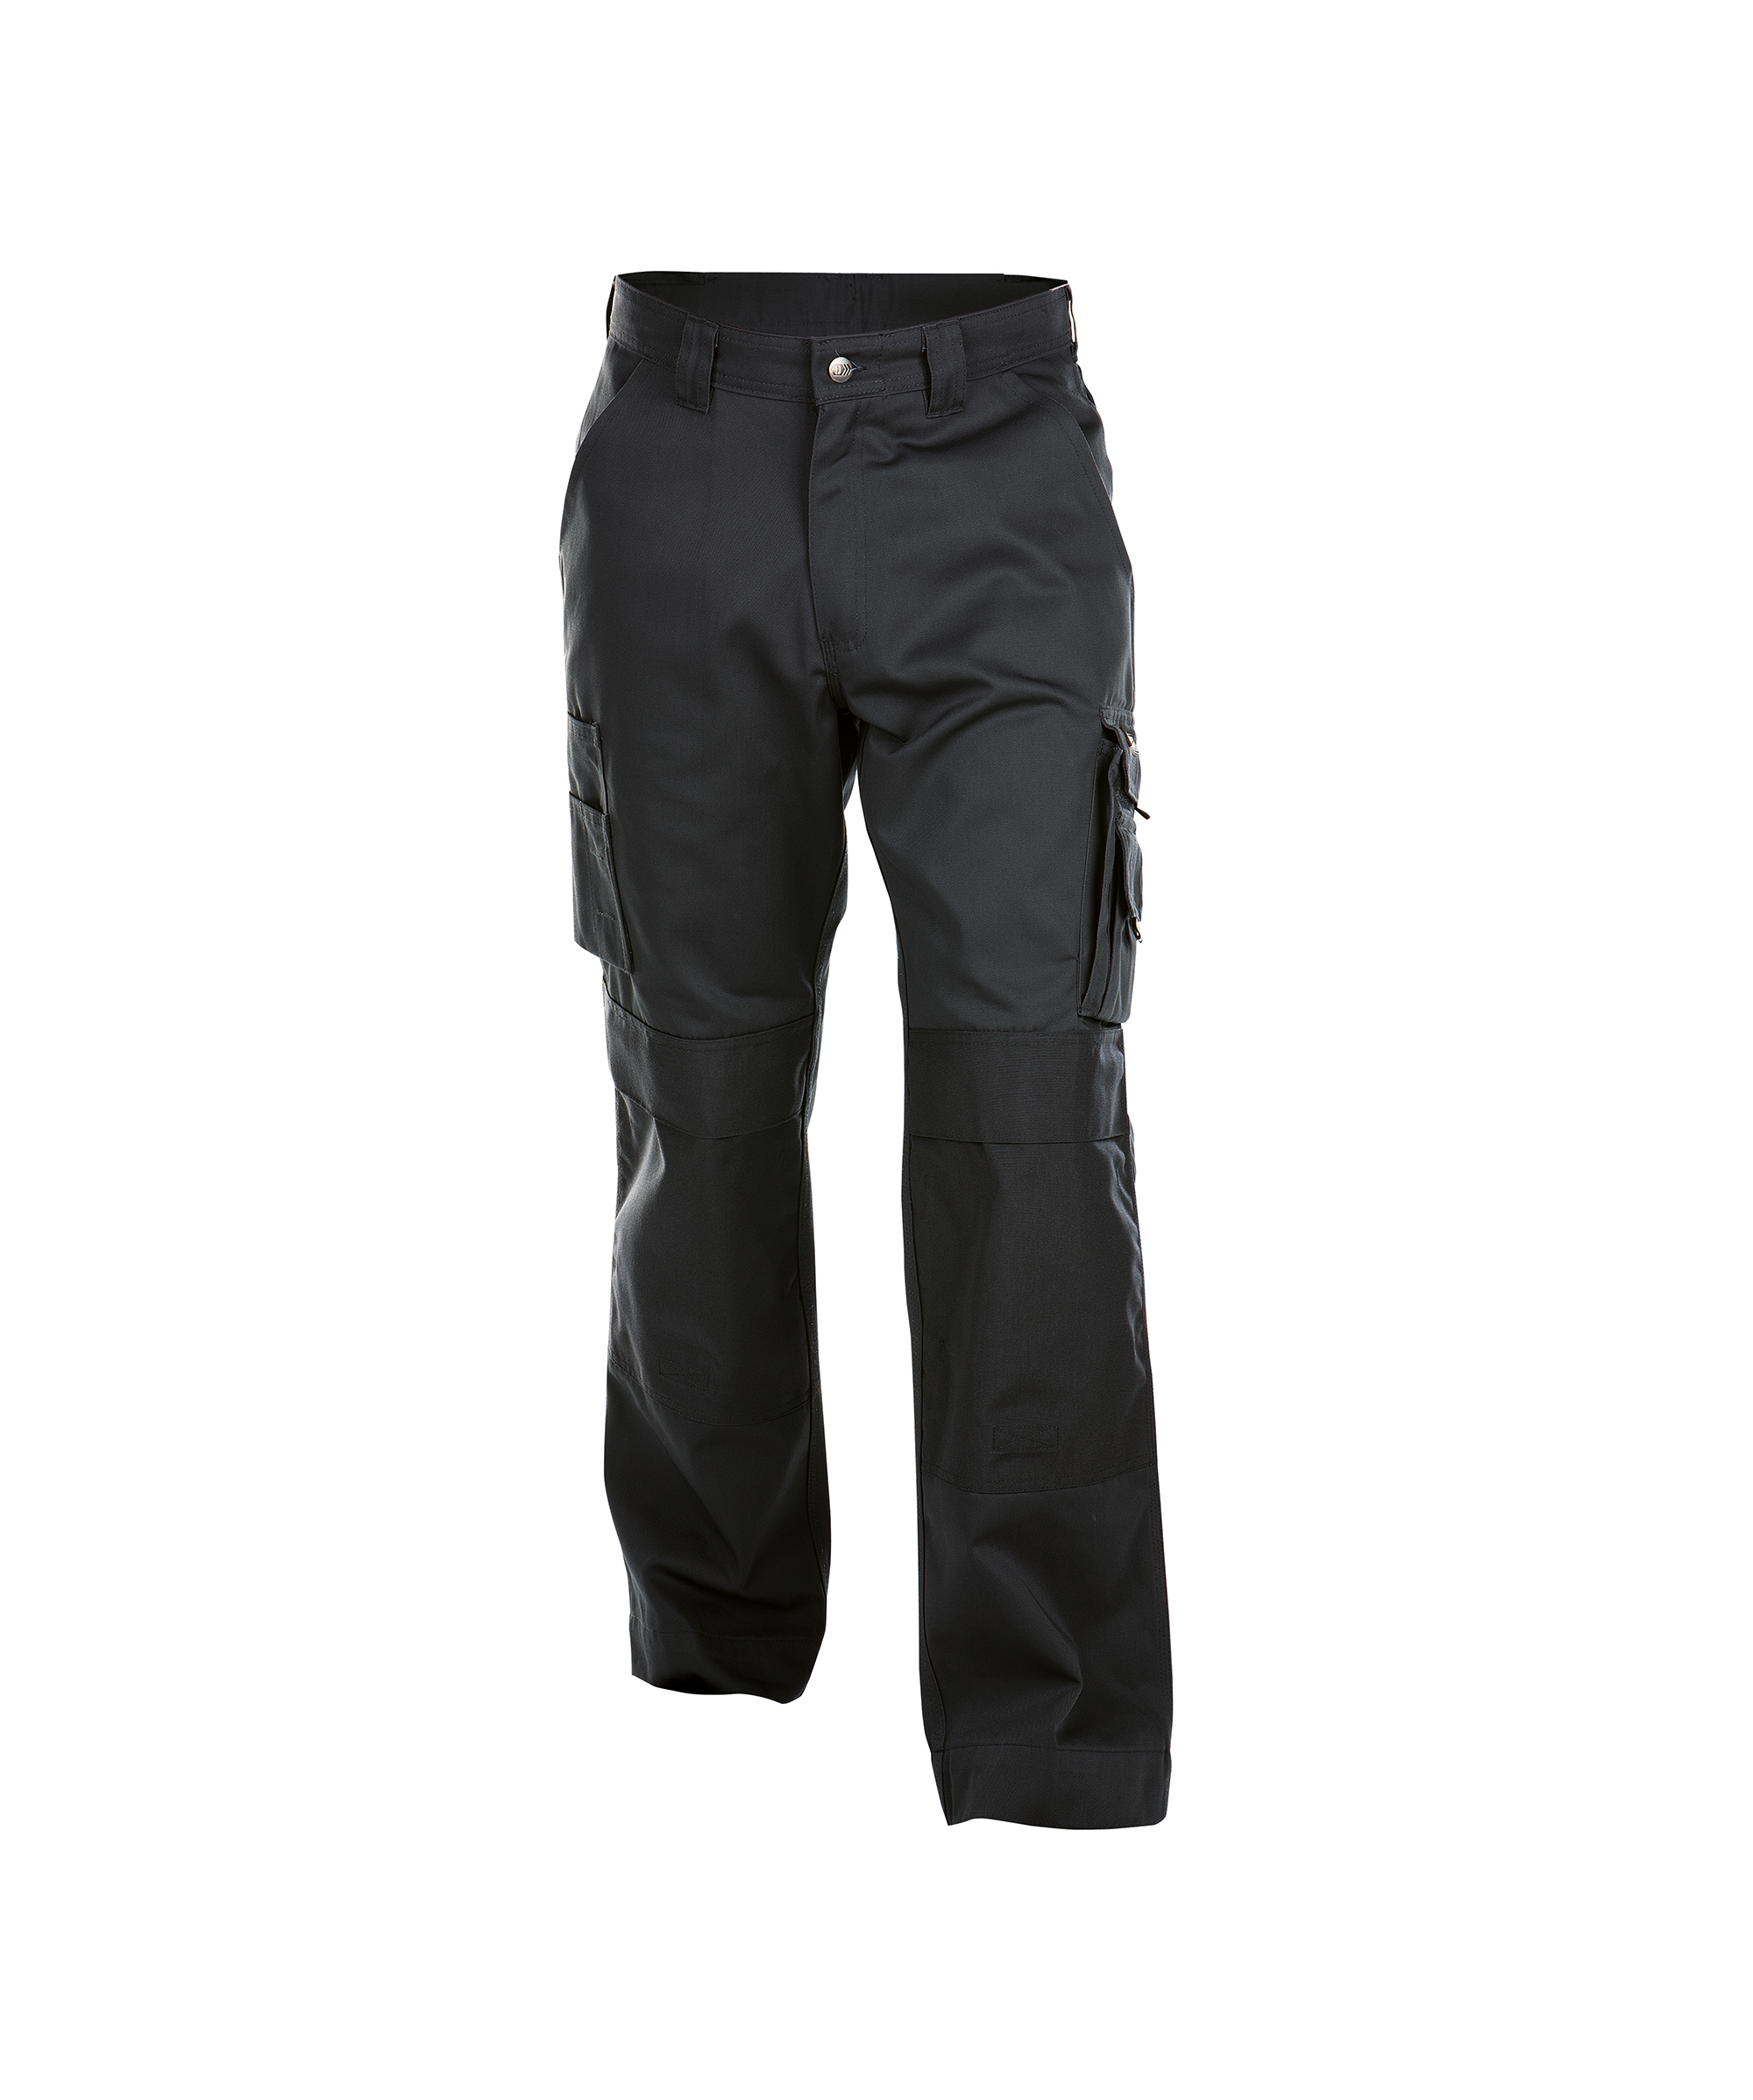 miami_work-trousers-with-knee-pockets_black_front.jpg